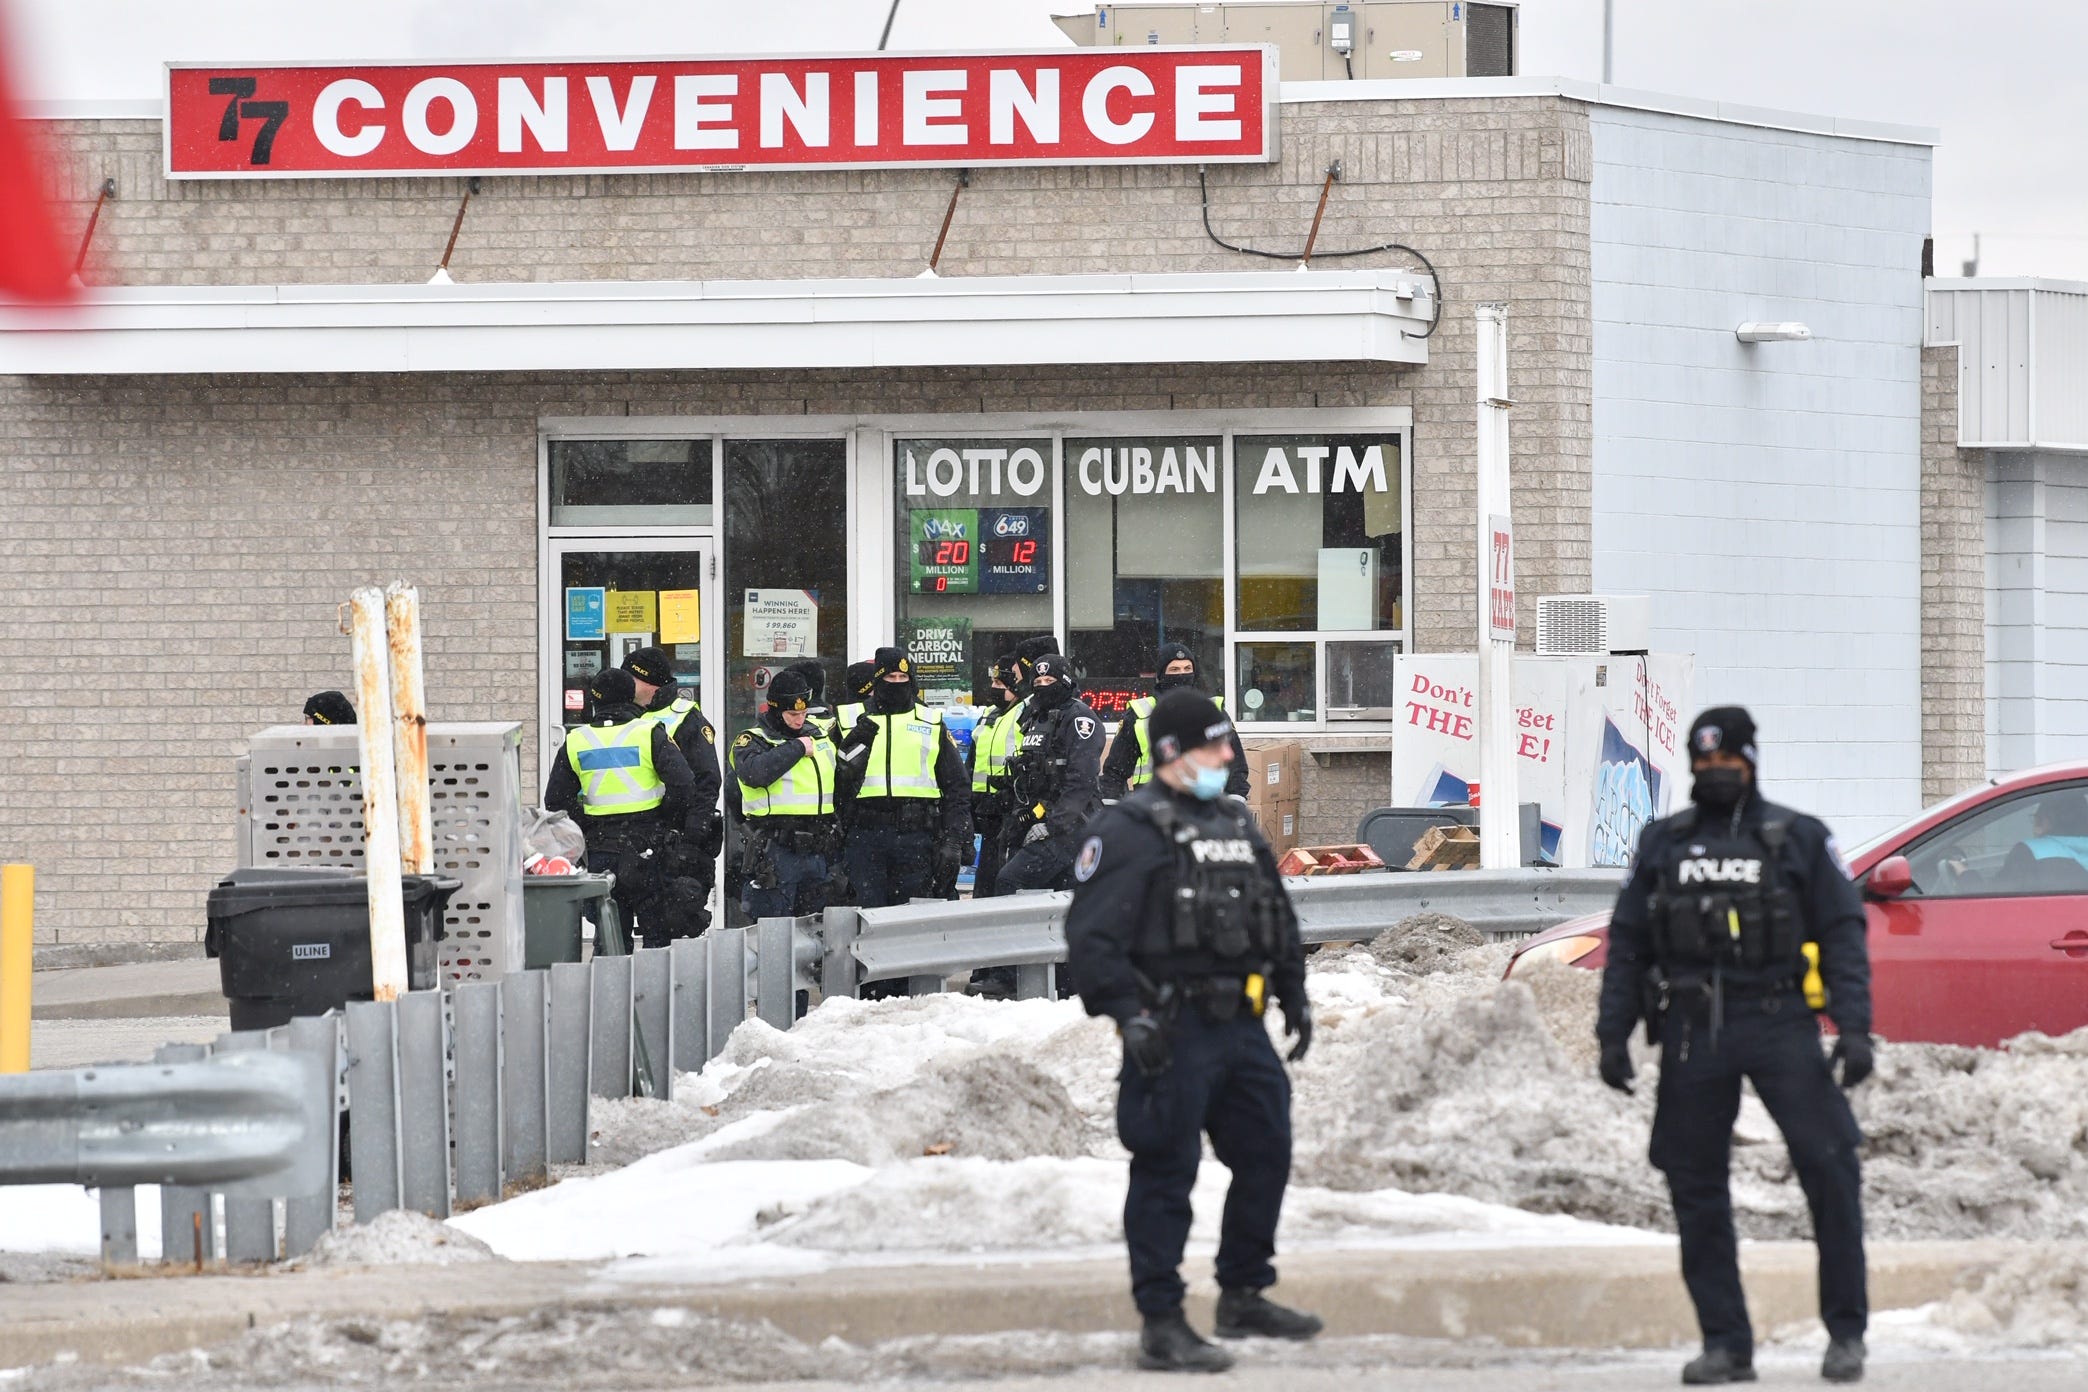 Windsor and London police officers inform people parked in a lot on Huron Church Road that they cannot stay parked unless they are using the businesses and will be towed. This is not far from Ambassador Bridge in Windsor, Ontario, on Feb. 13, 2022.